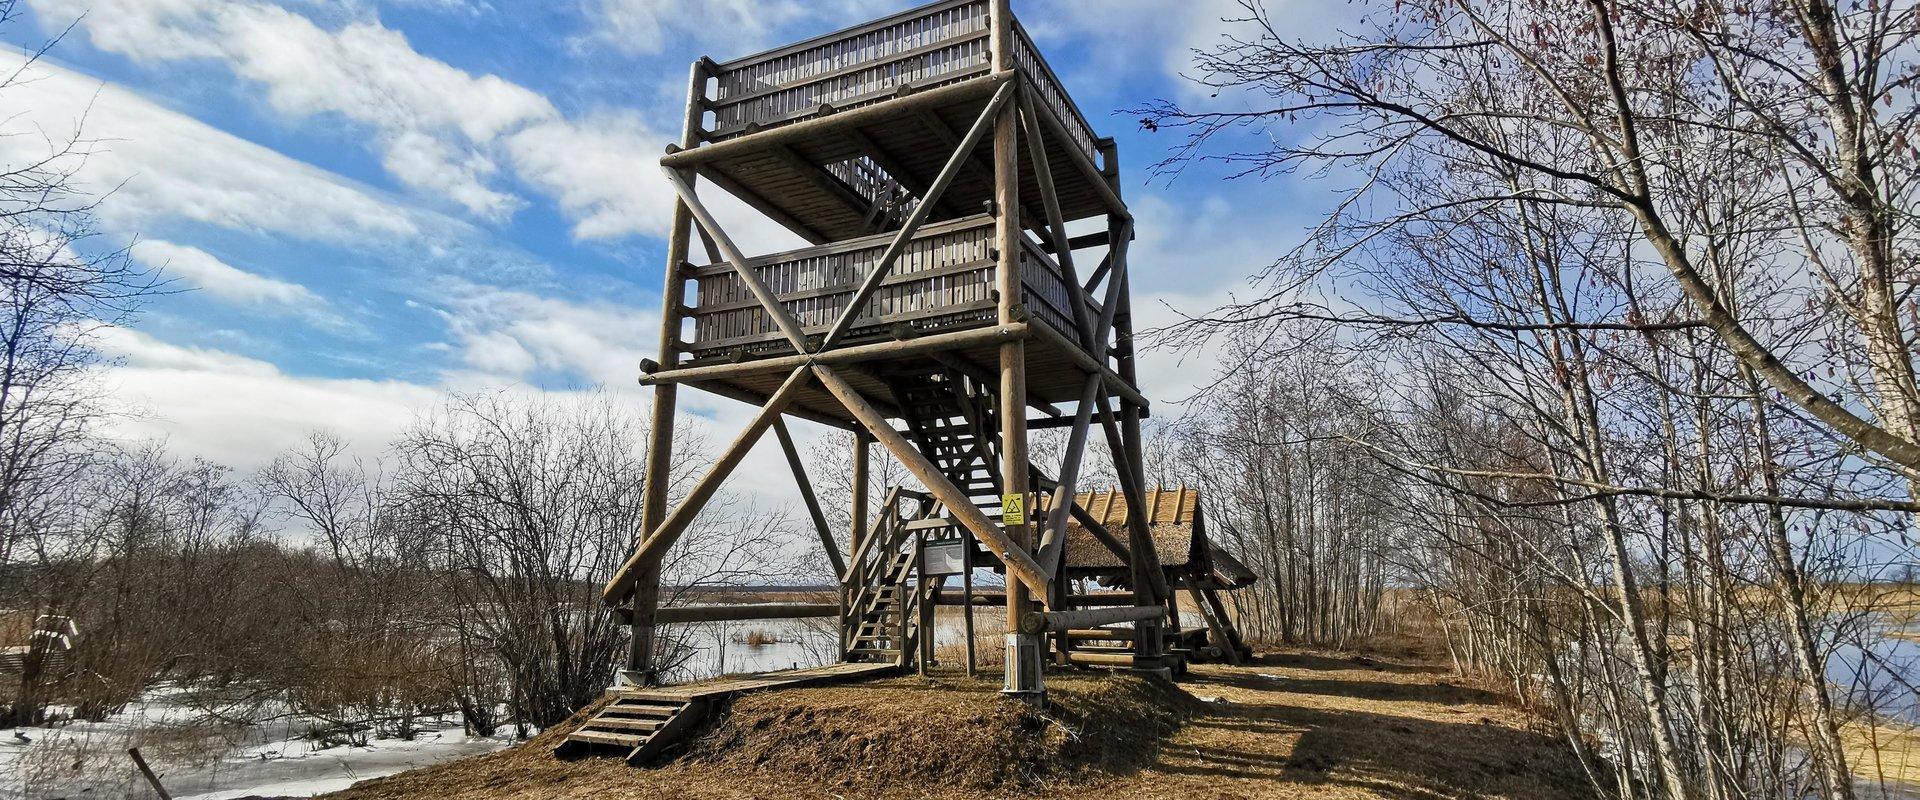 The 8-metre Penijõe observation tower has an open platform and there are benches at the top of the tower. The tower offers a view of the 3,000-hectare